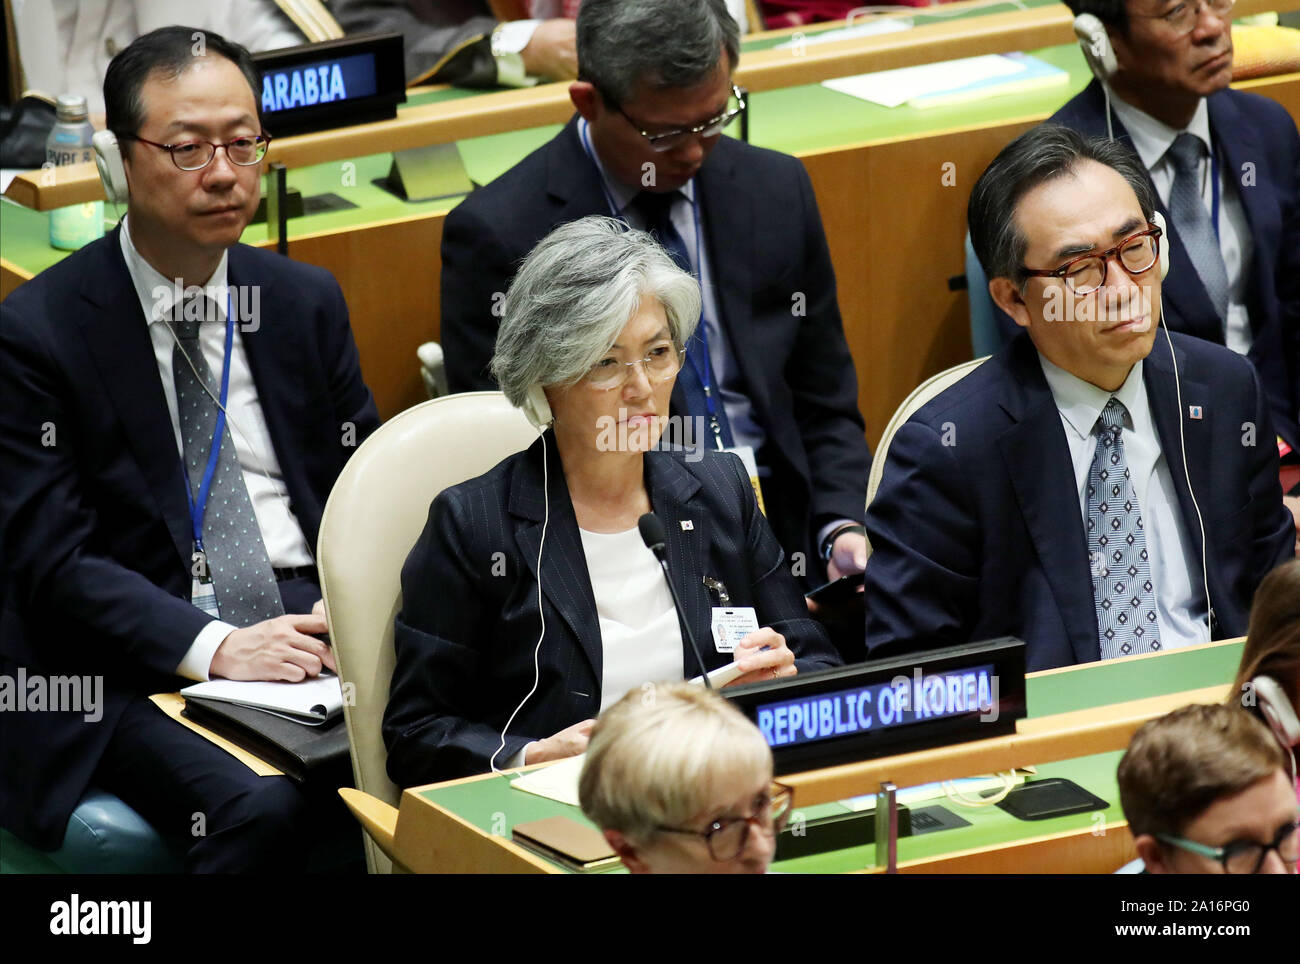 New York, United States. 24th Sep, 2019. South Korea's Foreign Minister Kang Kyung-wha, second left, listens to speakers at the 74th General Debate at the United Nations General Assembly at United Nations Headquarters in New York City on Tuesday, September 24, 2019. Photo by Monika Graff/UPI Credit: UPI/Alamy Live News Stock Photo